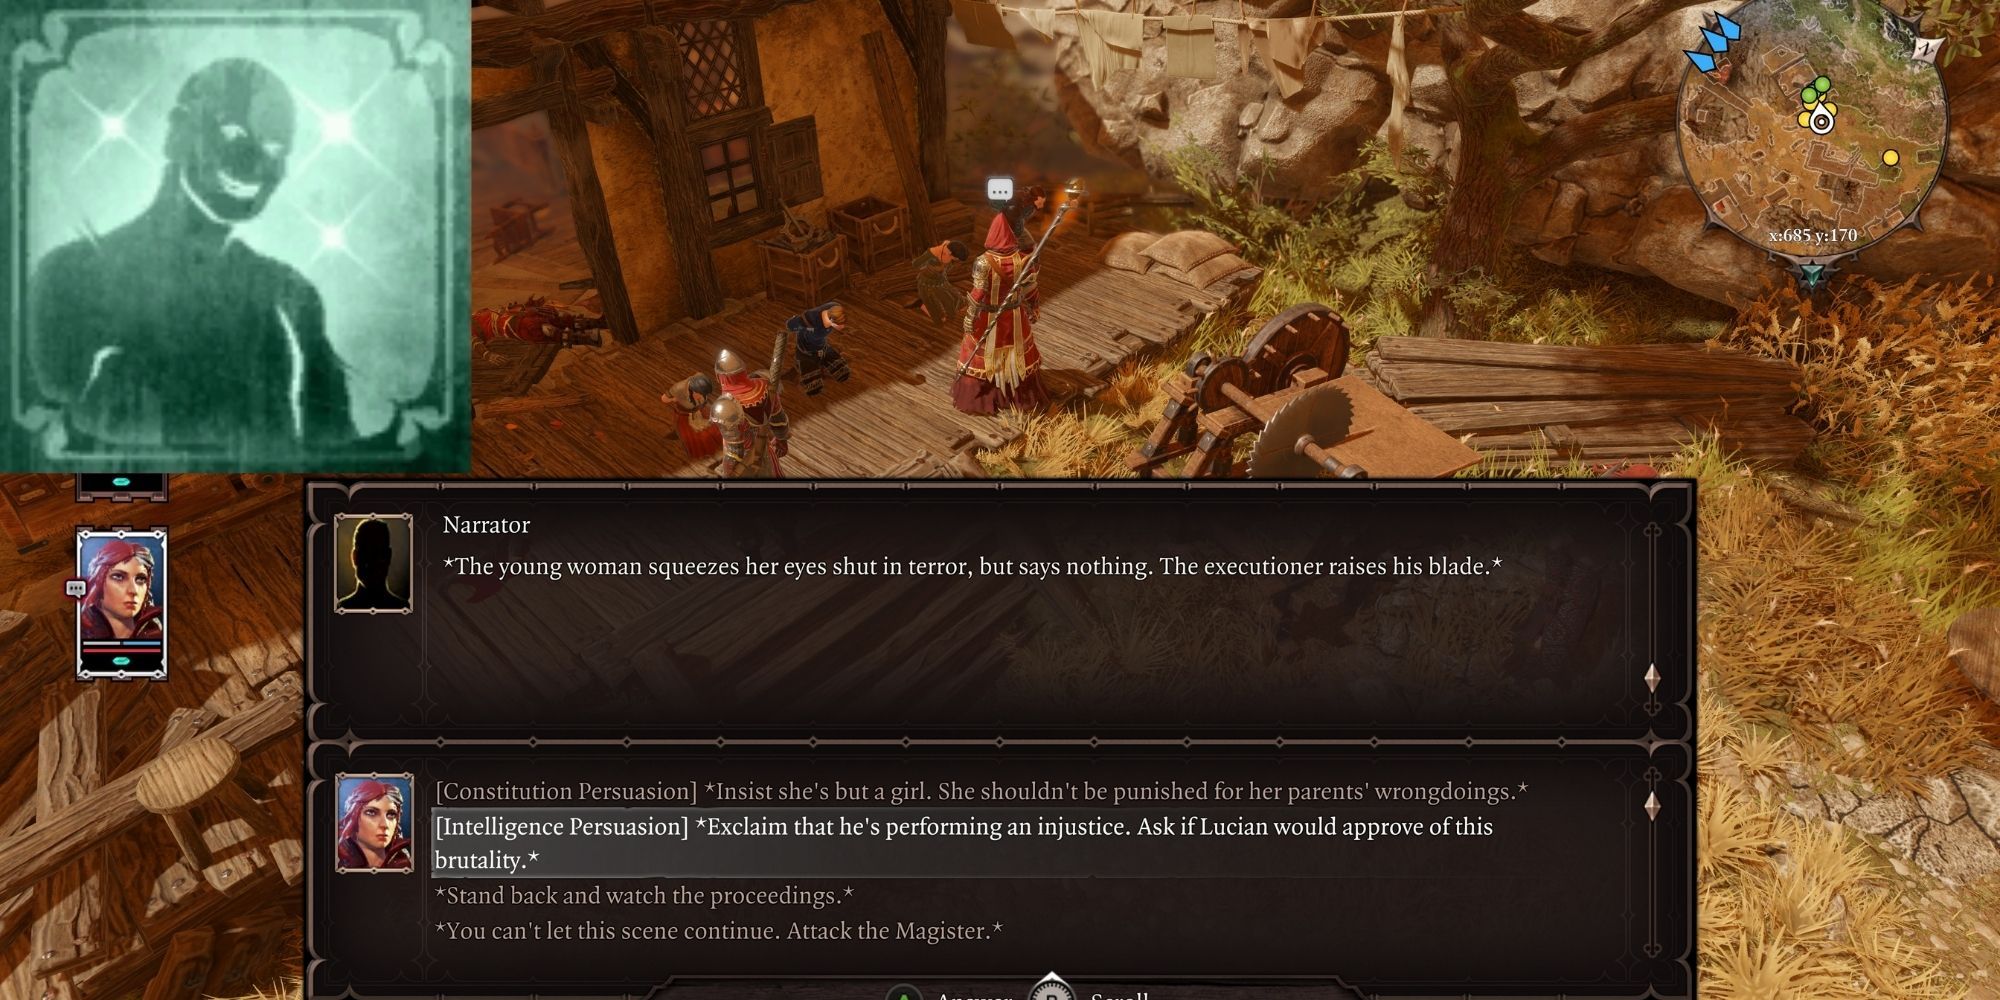 Divinity Original Sin 2 - Persuasion Ability Icon - A persuasion check during the game